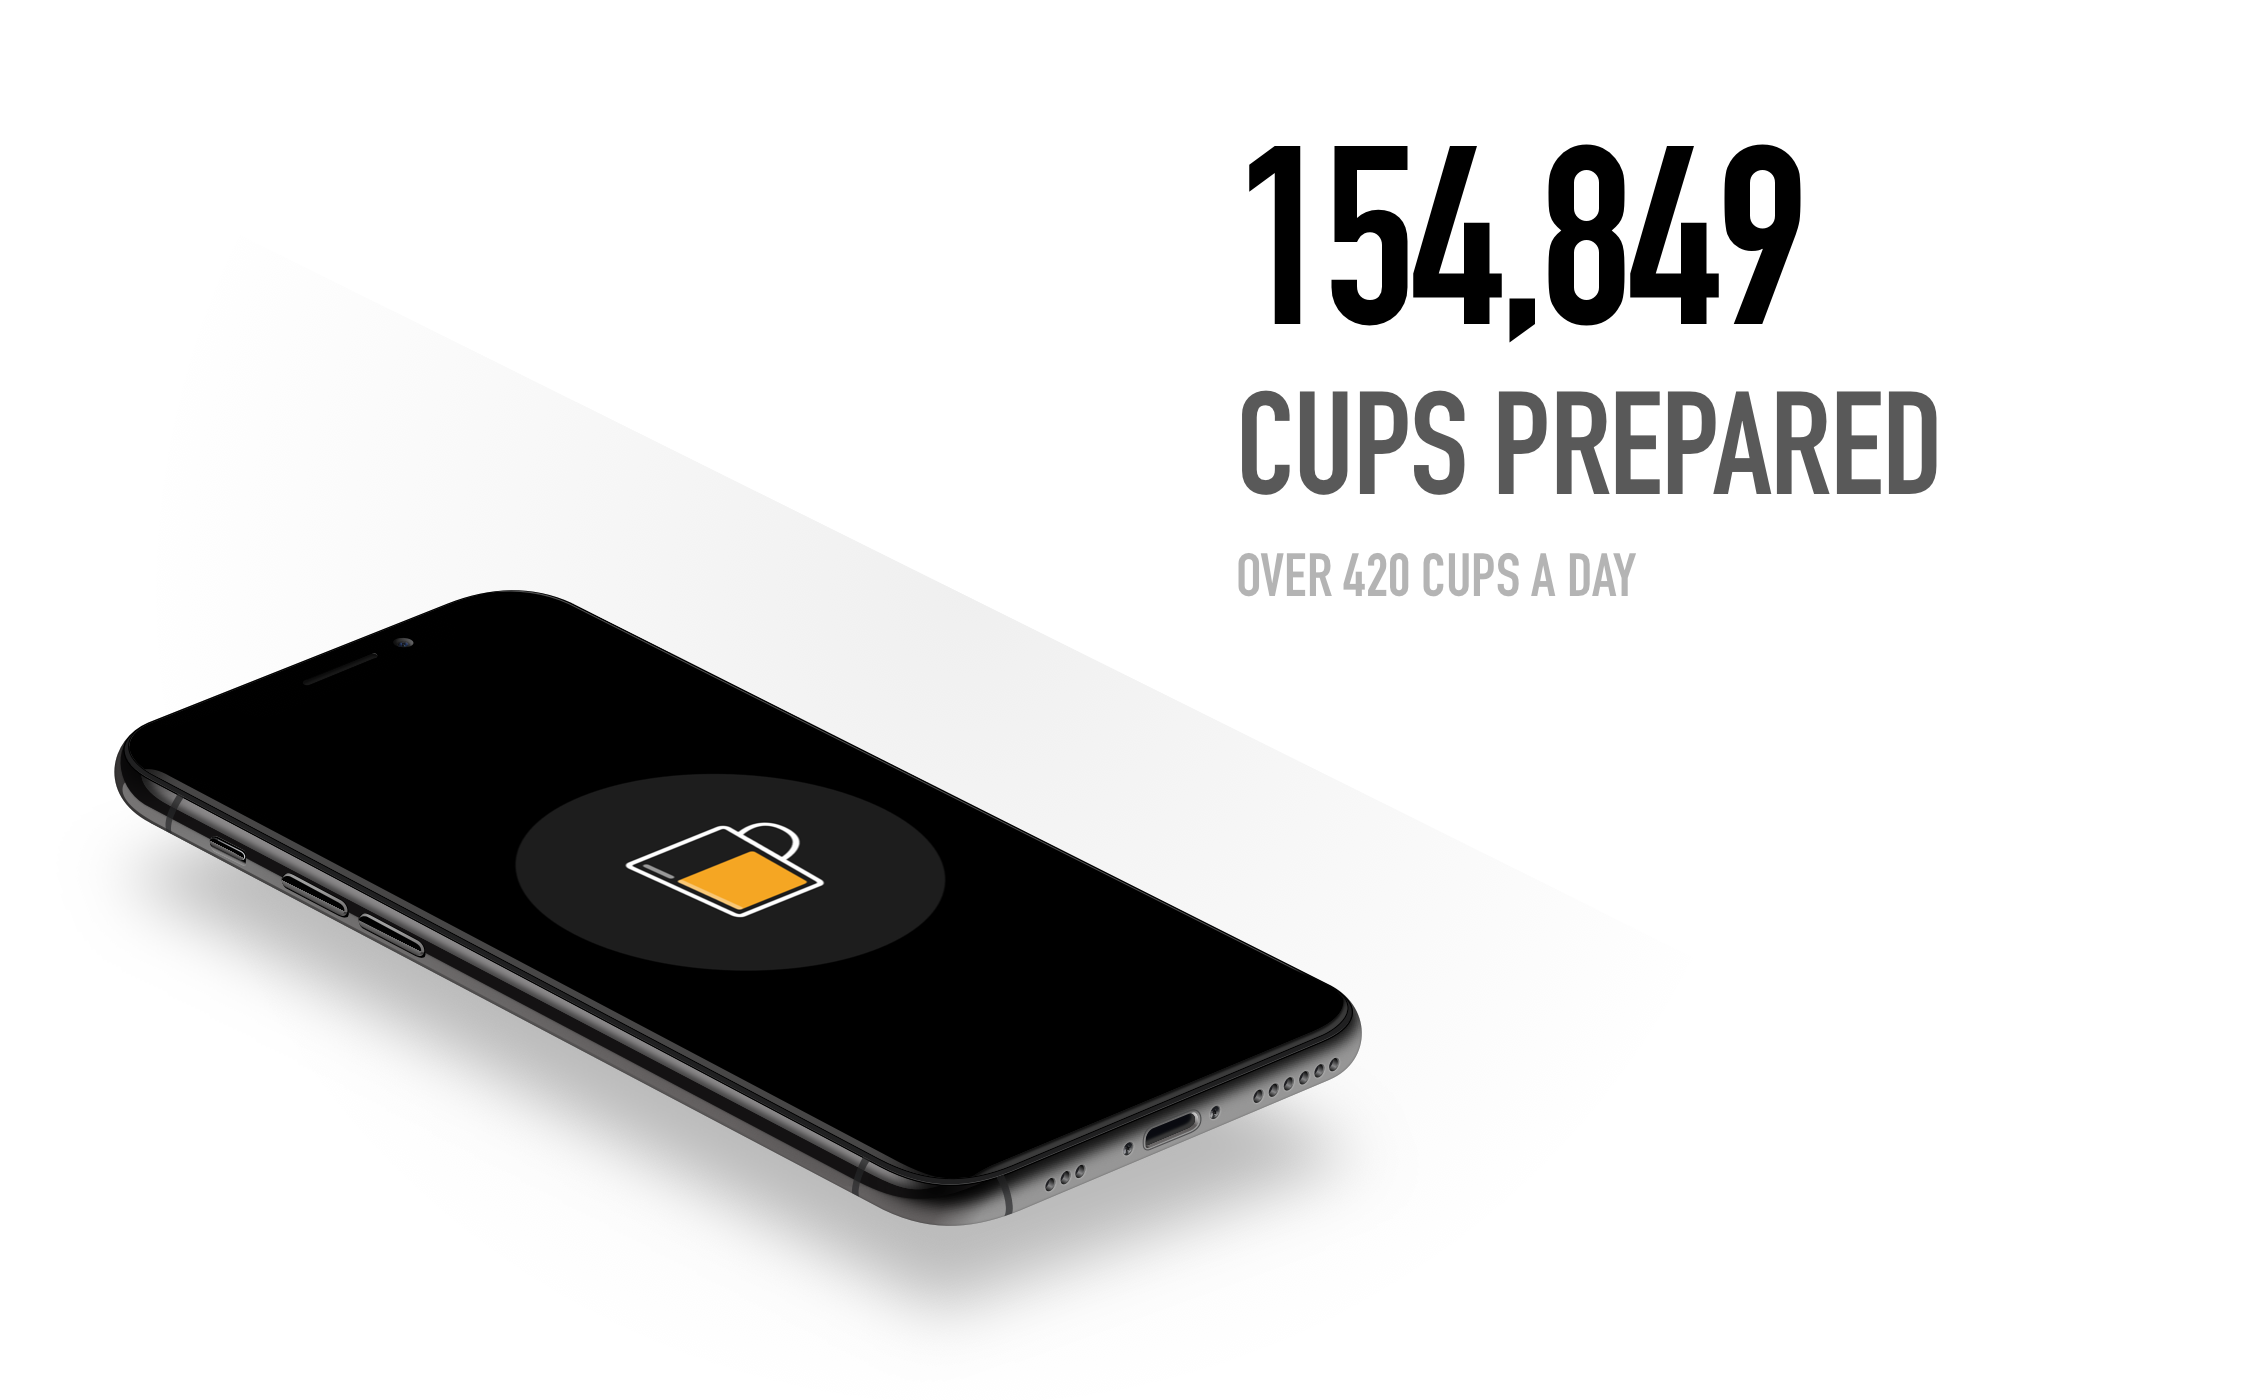 Total of 154,849 cups brewed